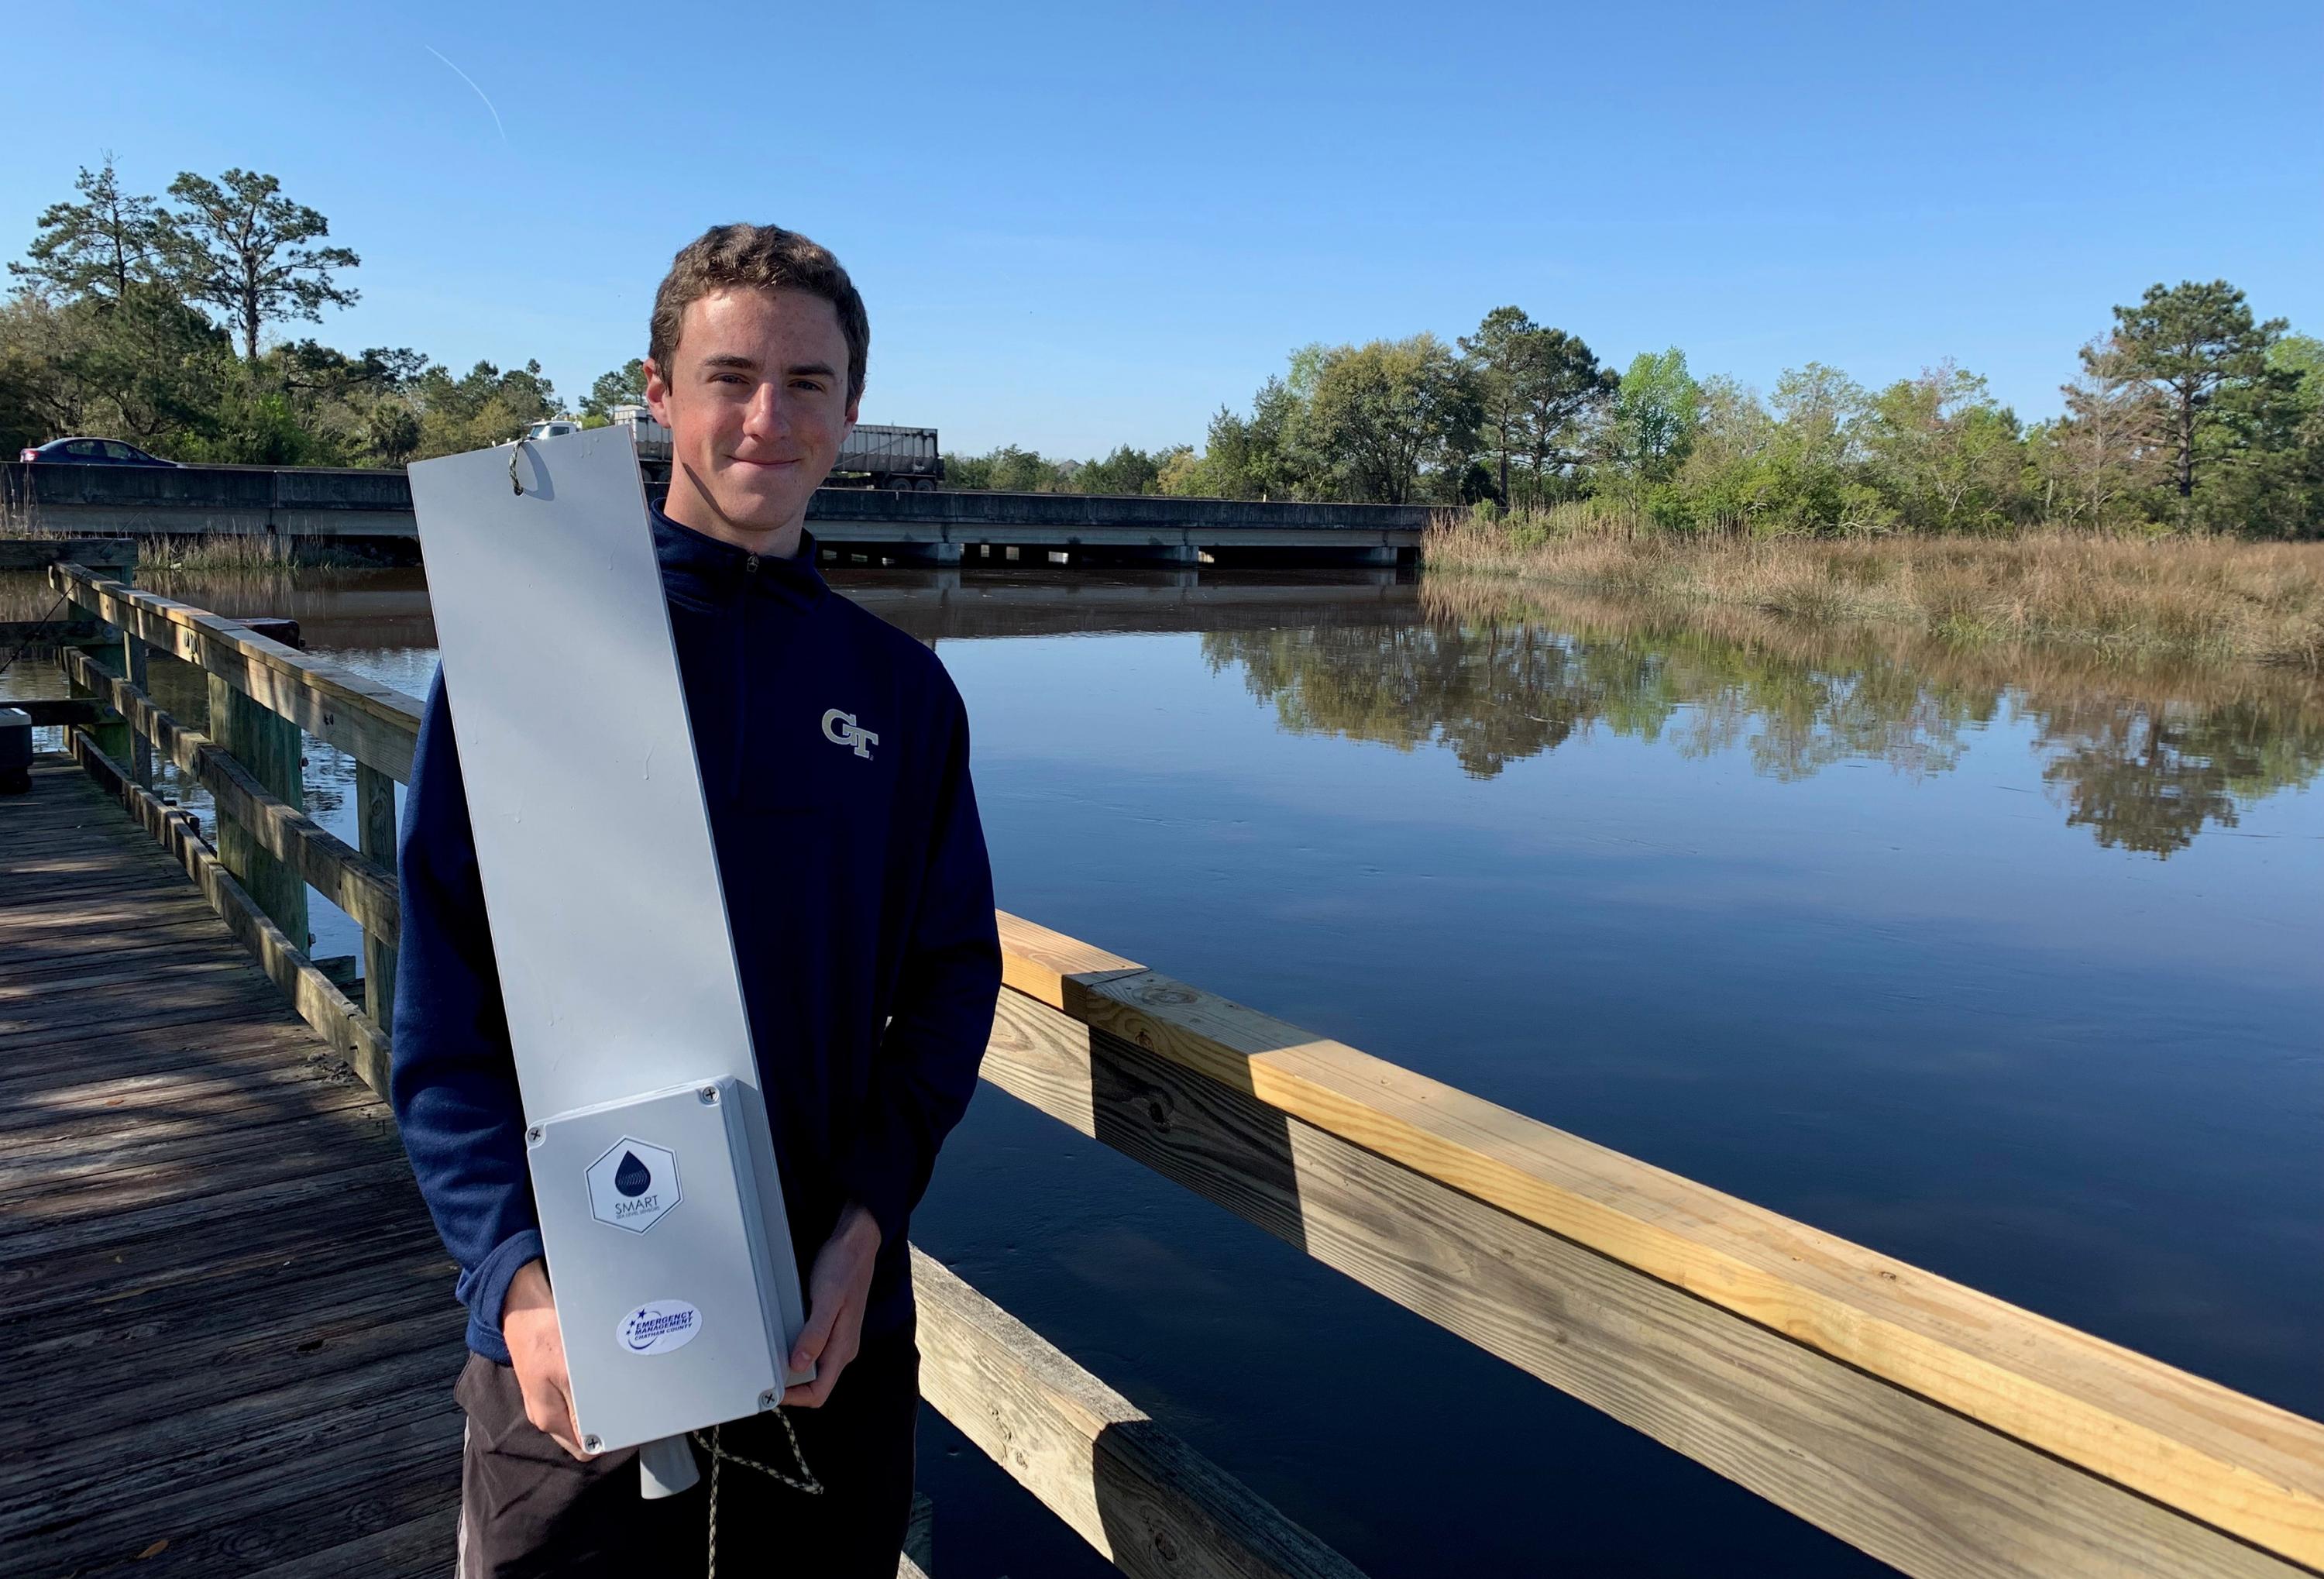 Georgia Tech researchers are working with Chatham County to develop a sensor network partnered with data analytics for more accurate, localized flooding forecasts for improved emergency planning and response. (Credit: Russell Clark, Georgia Tech)